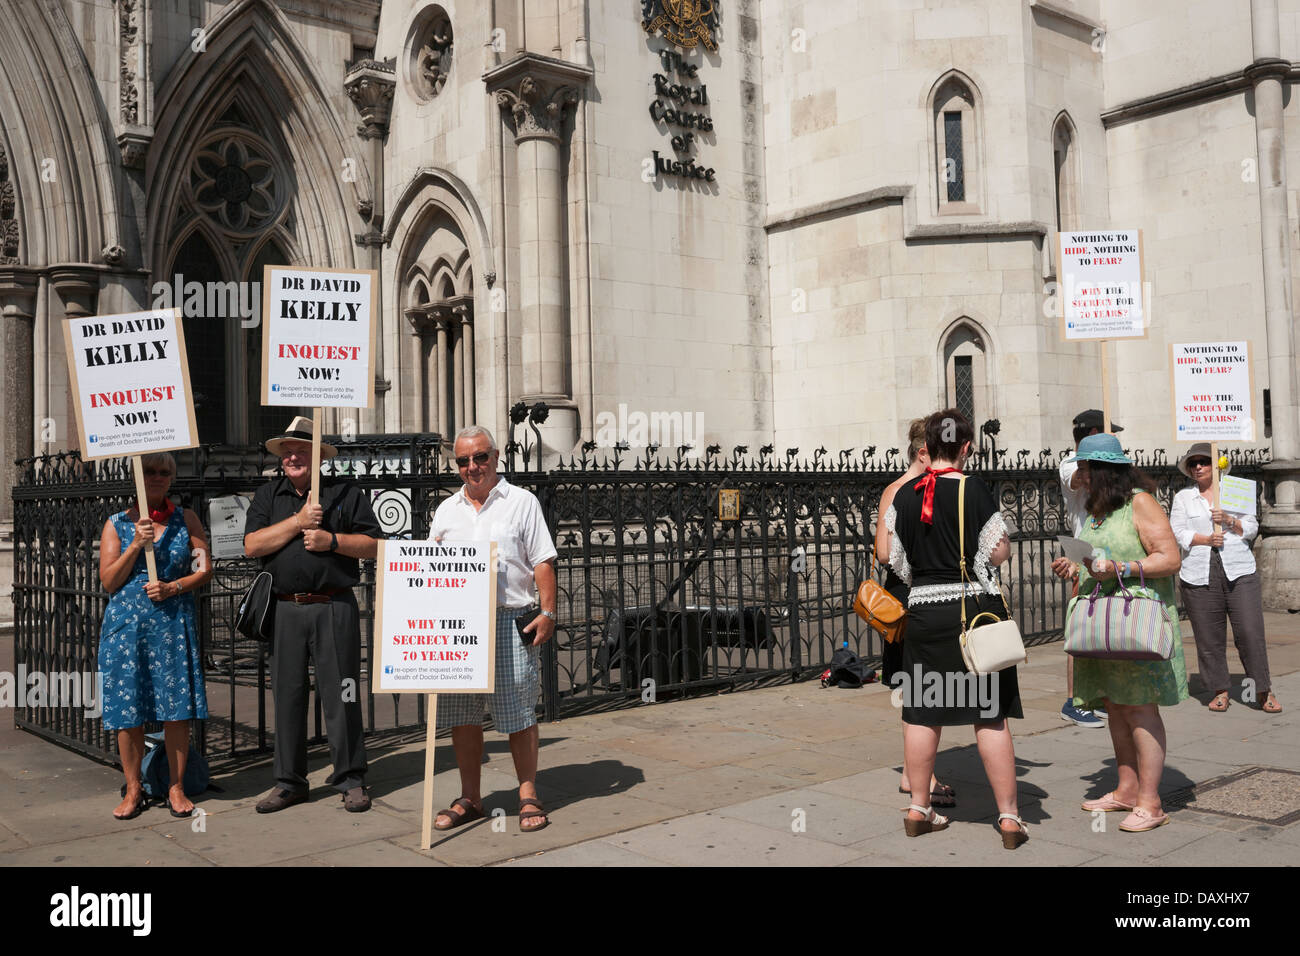 Group of supporters rally for justice for Dr David Kelly on tenth anniversary of his death outside Royal Courts of Justice, UK Stock Photo